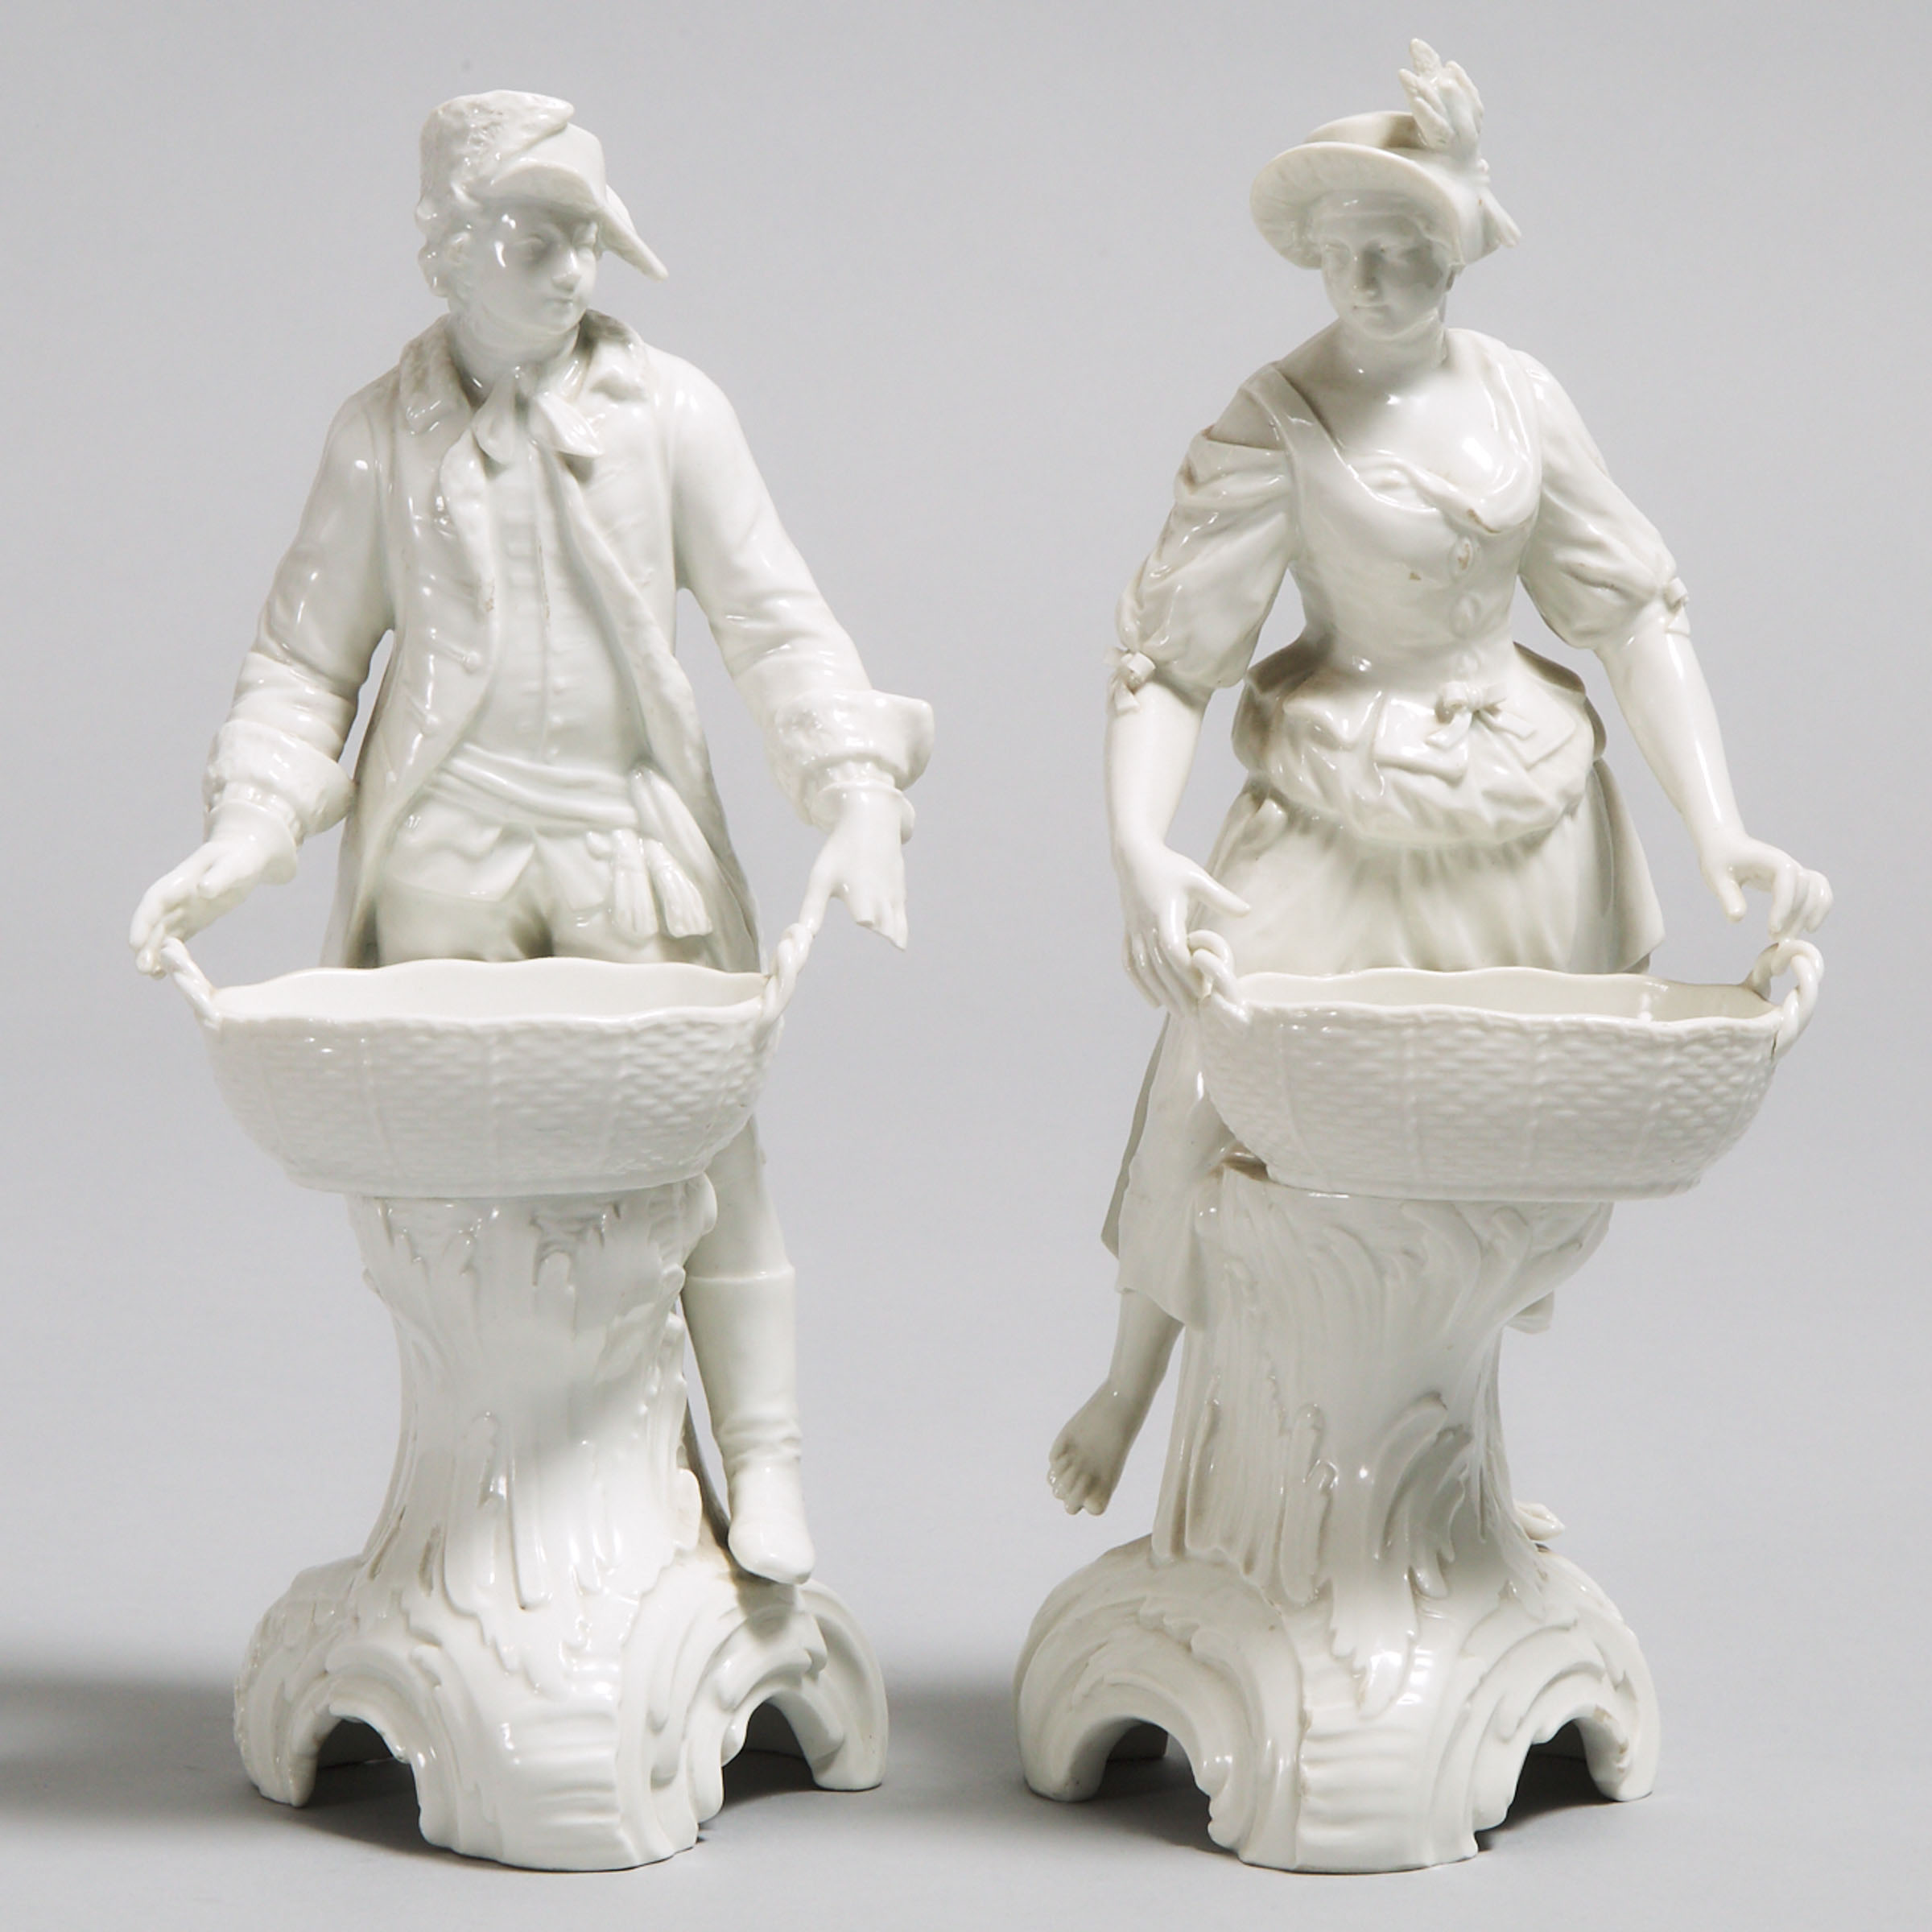 Pair of Berlin White-Glazed Figural Salt Cellars, late 19th/early 20th century